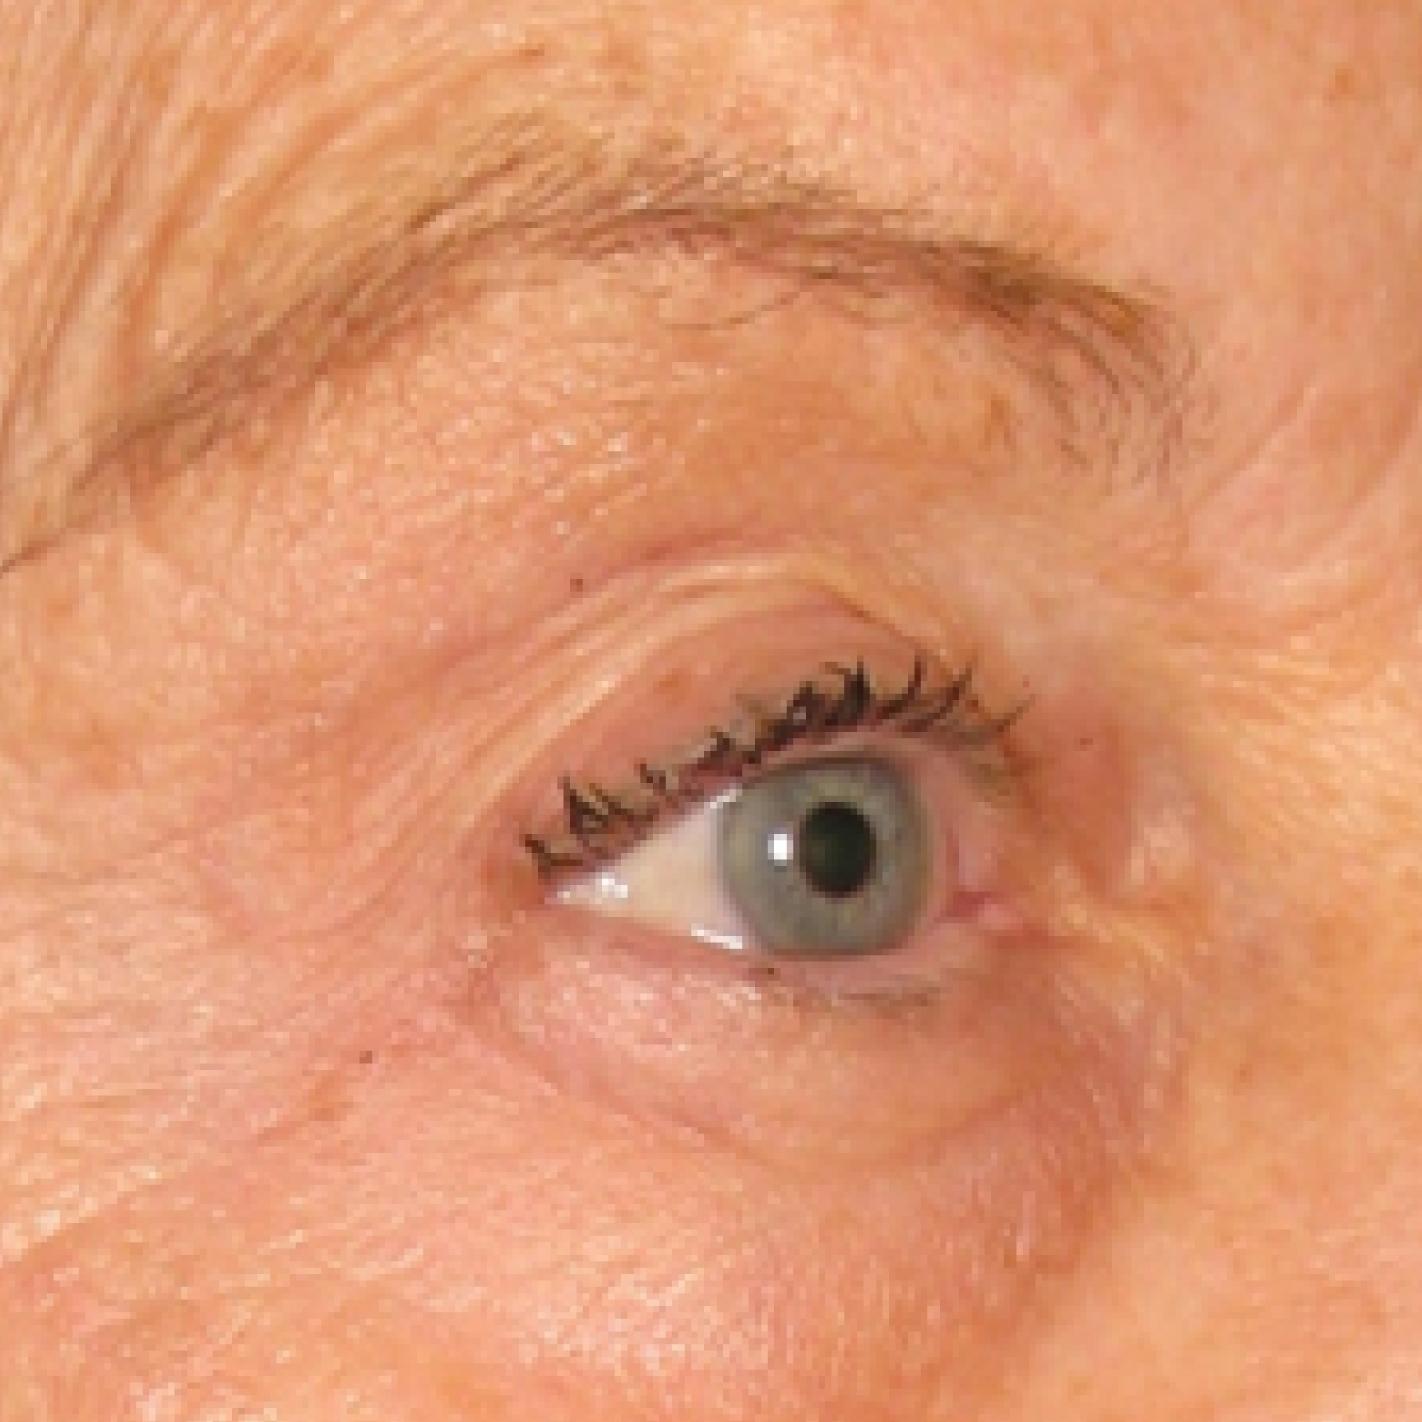 Ultherapy® - Brow: Patient 1 - After 1